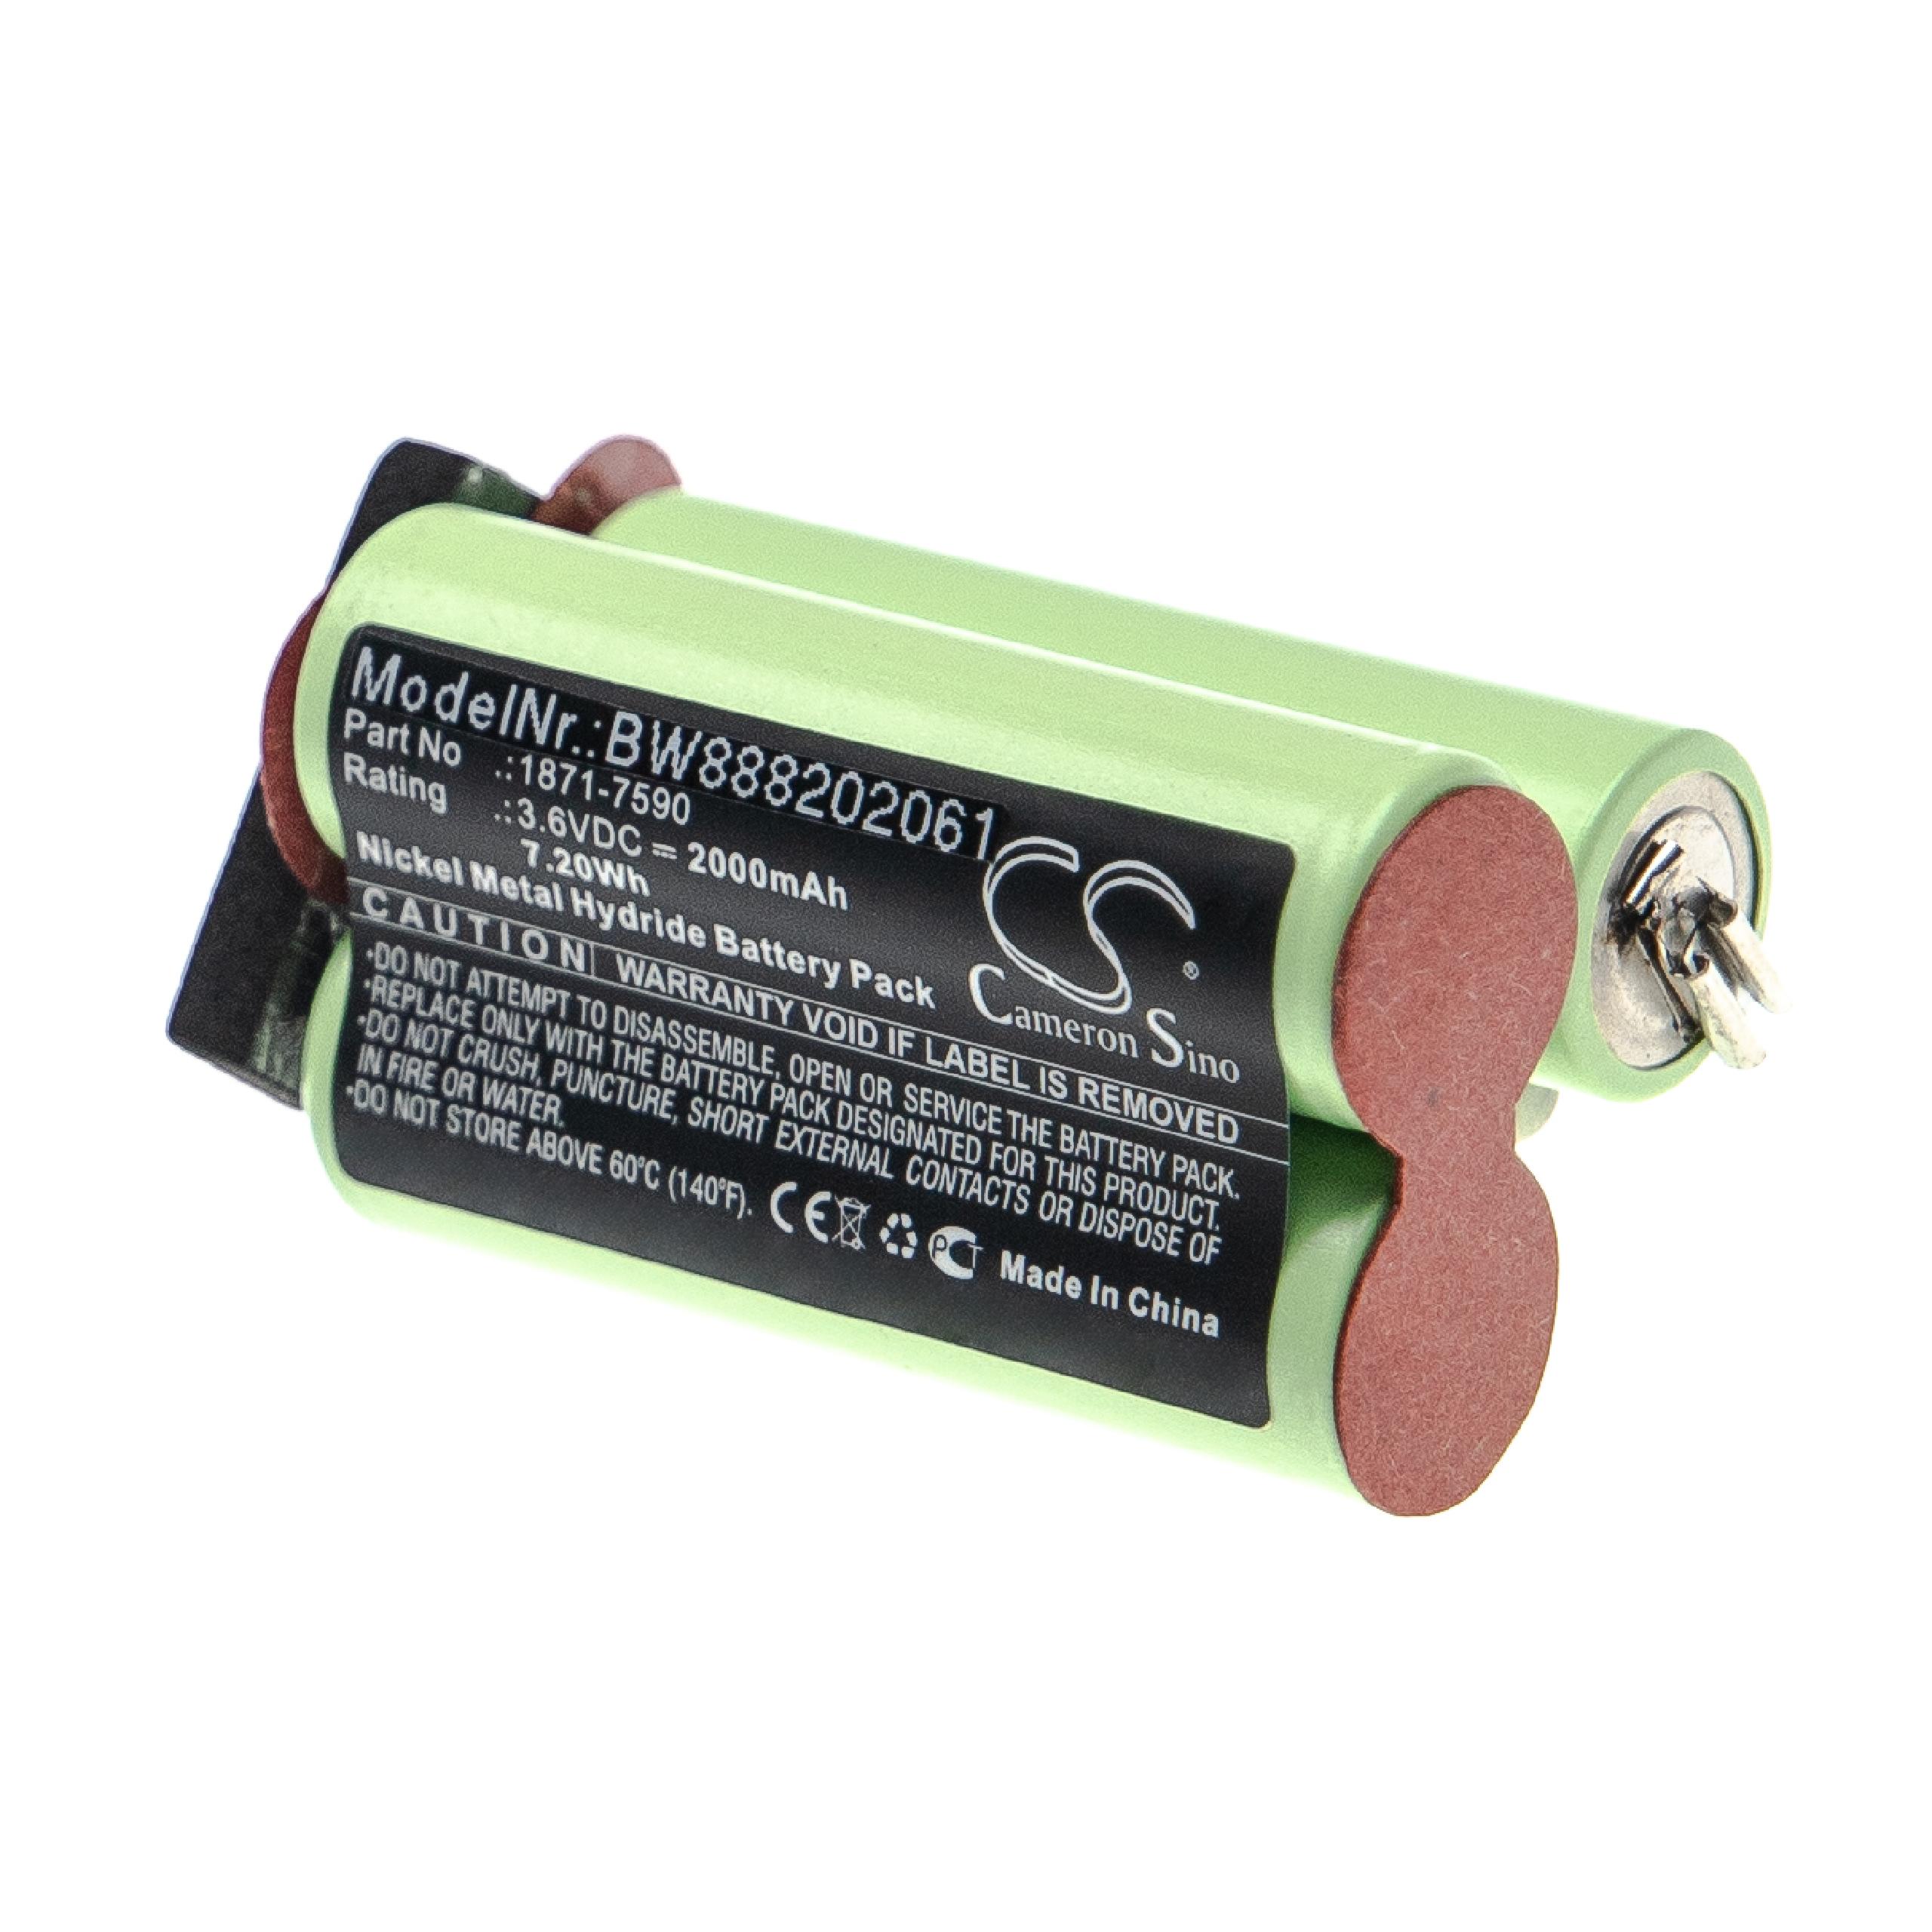 Hair Trimmer Battery Replacement for Moser 1871-7590 - 2000mAh 3.6V NiMH